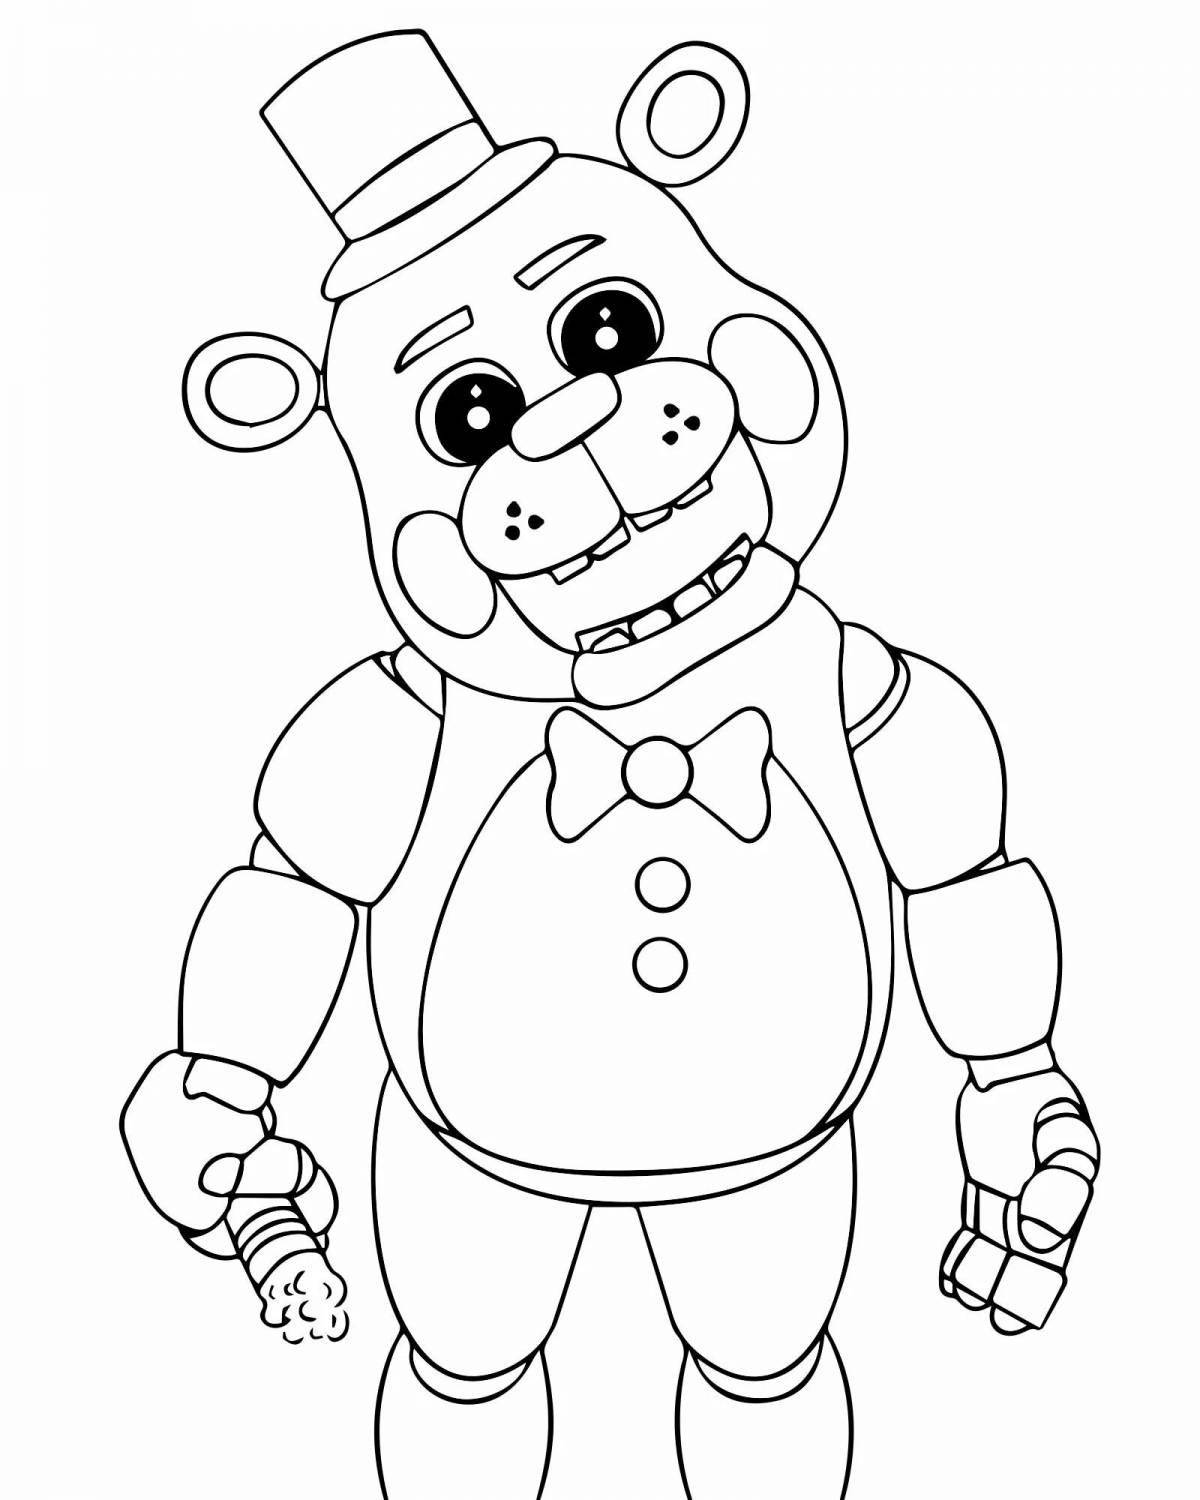 Incredible freddy bear coloring book for kids